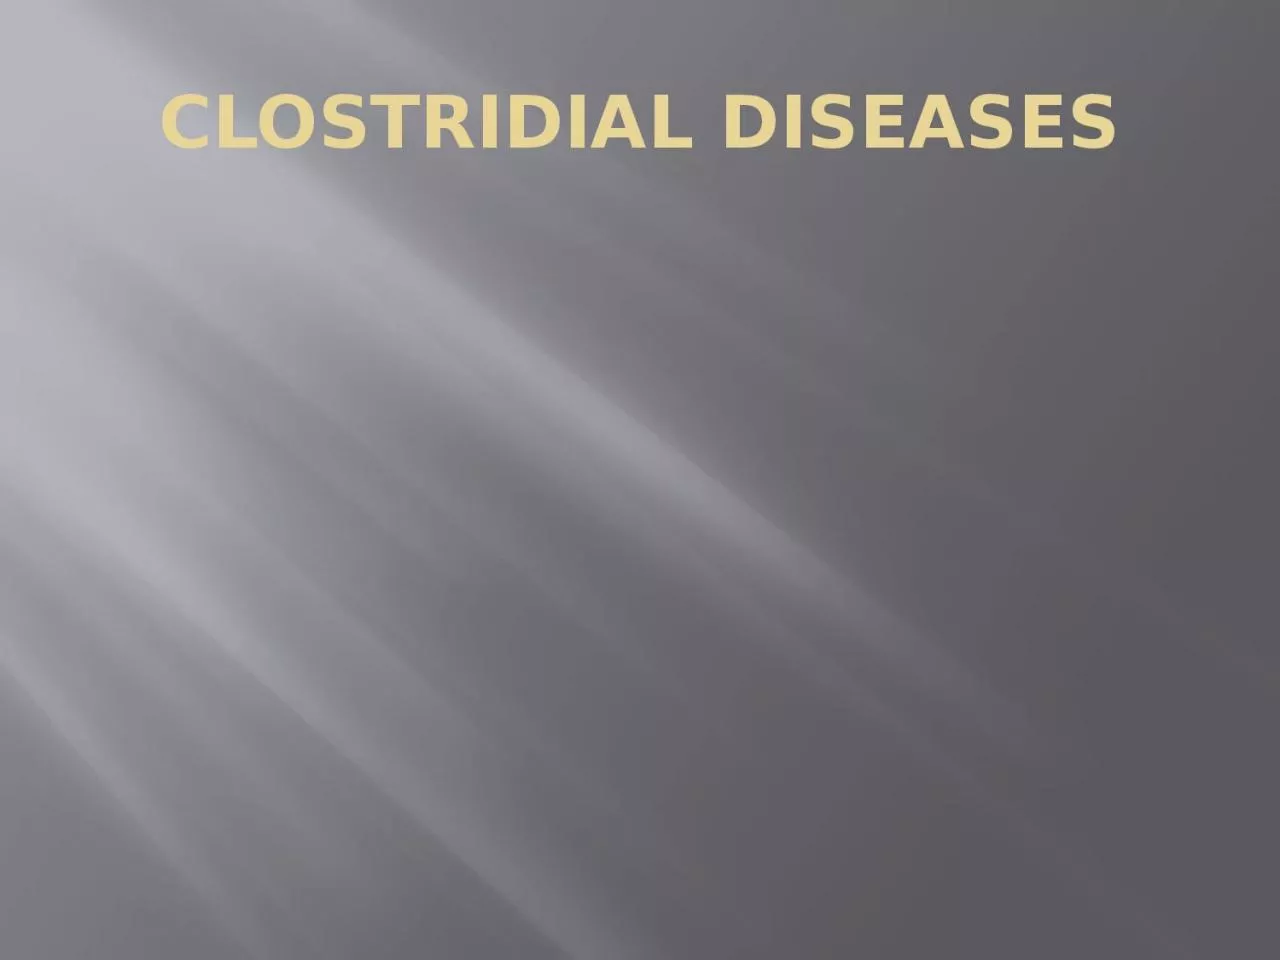 CLOSTRIDIAL DISEASES Introduction